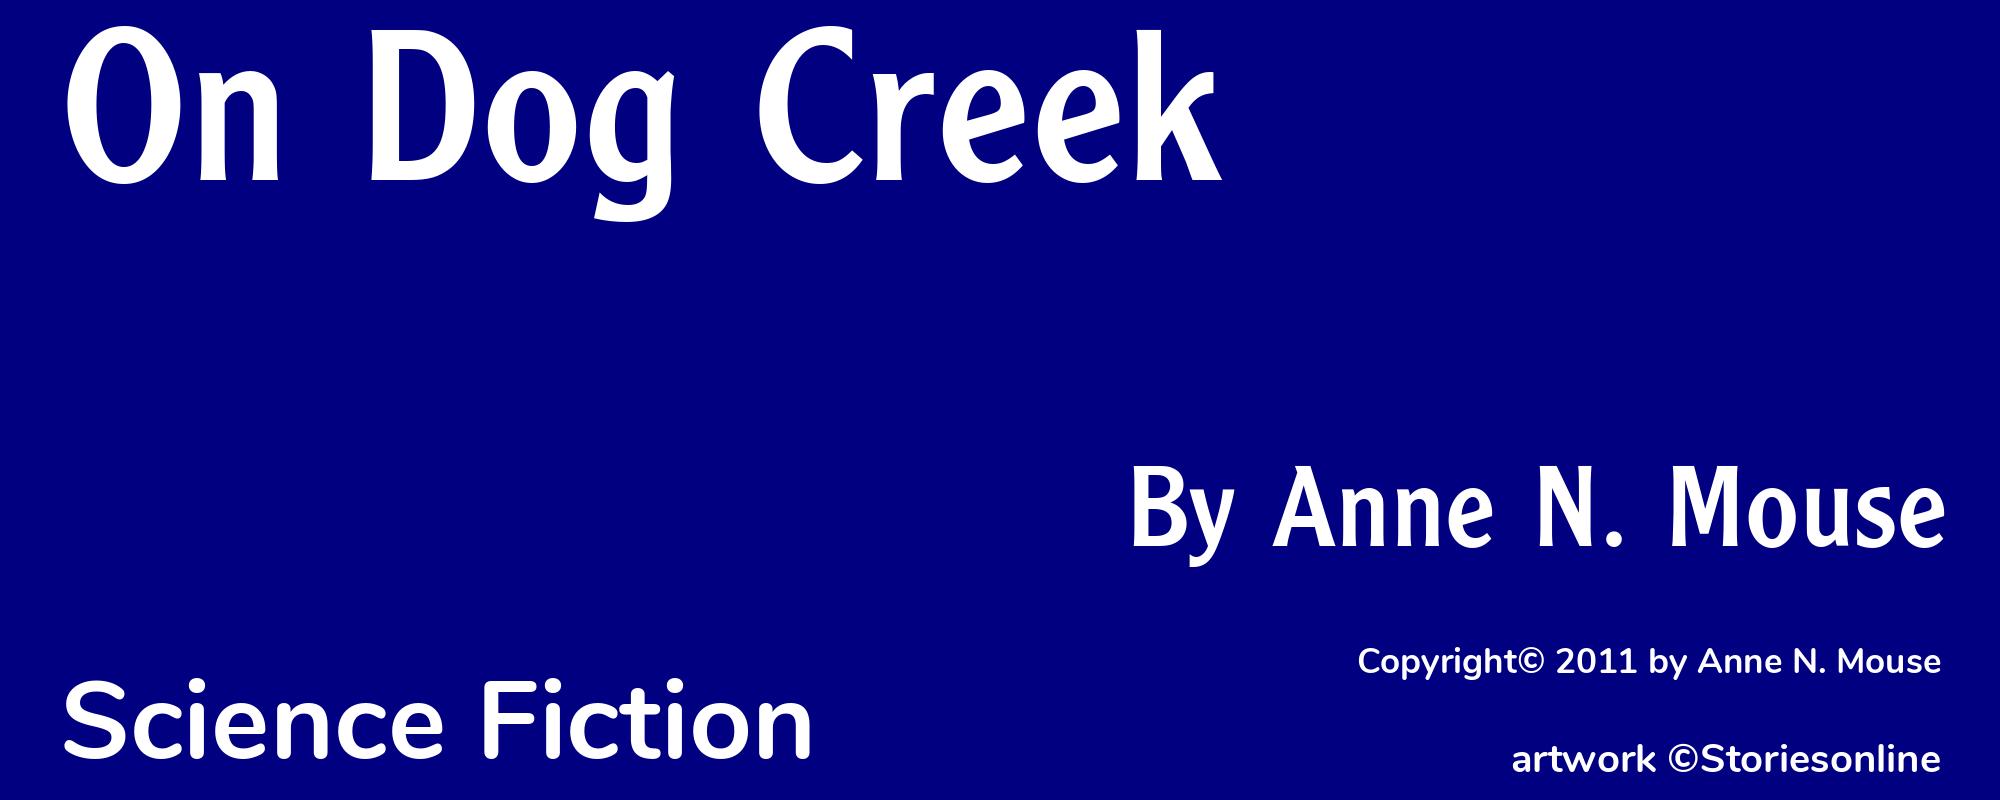 On Dog Creek - Cover